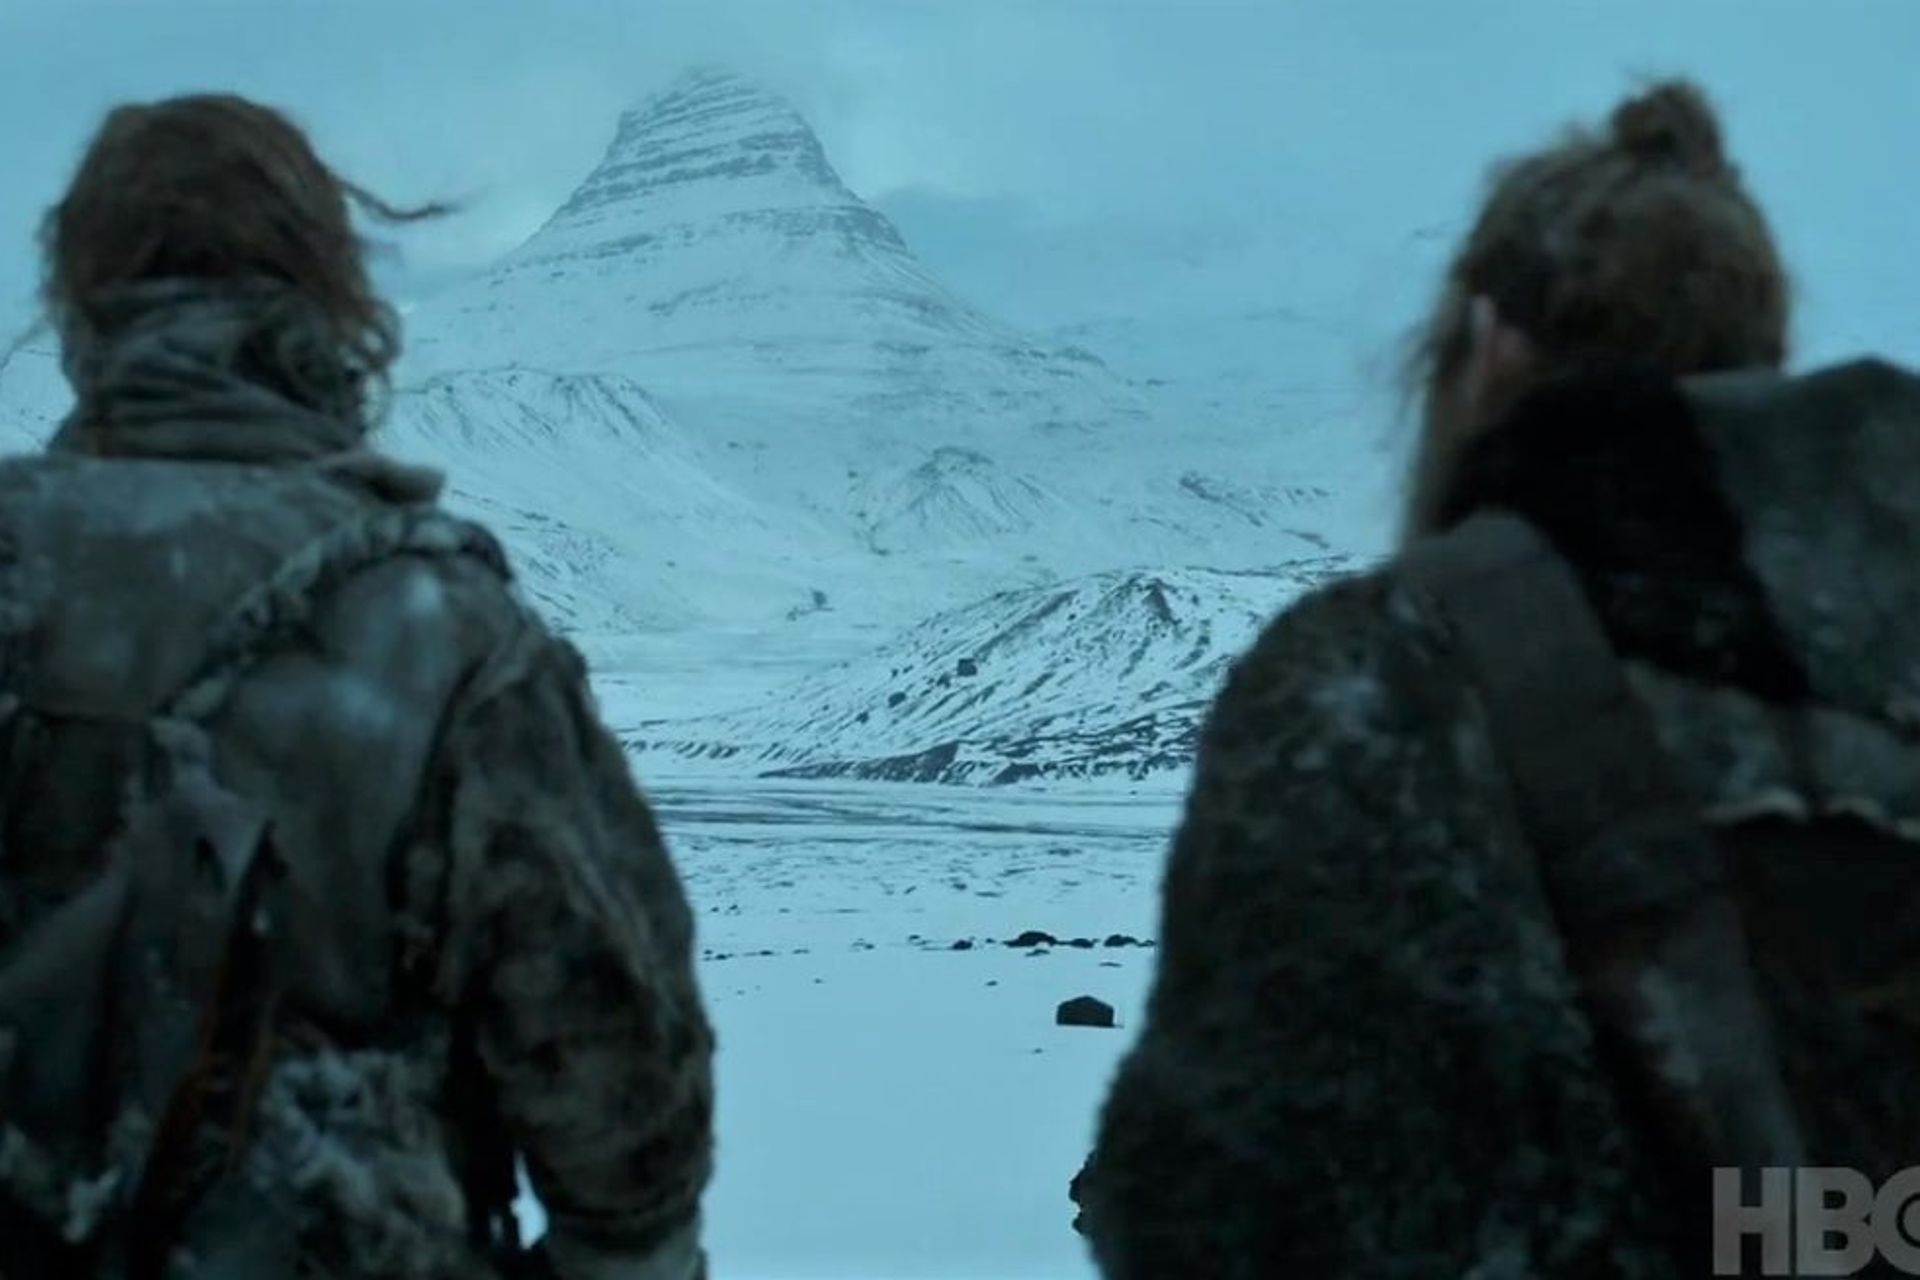 Picture of Arrowhead Mountain, a famous mountain from the Game of Thrones series